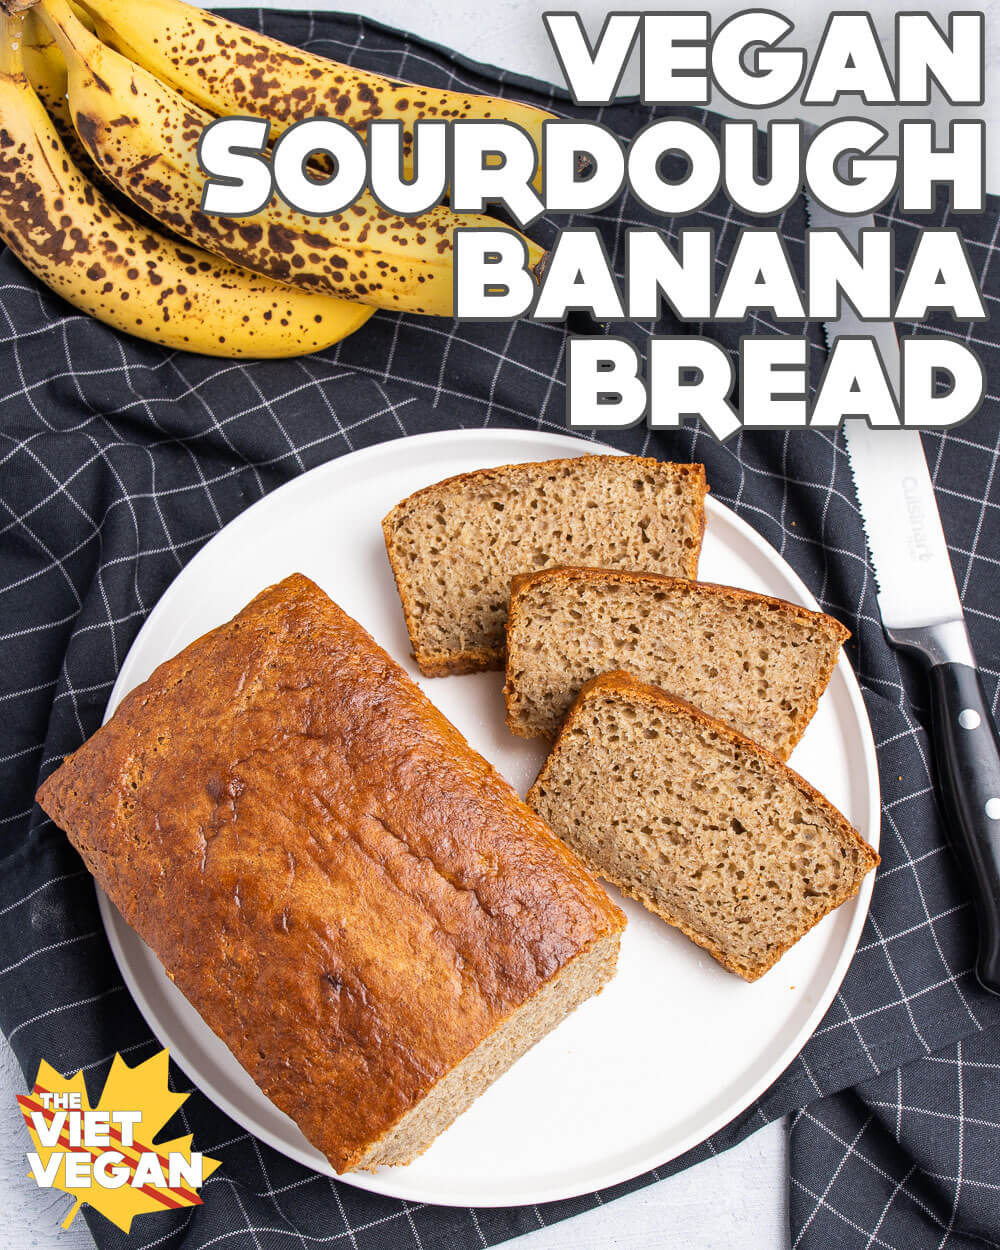 vegan sourdough banana bread, sliced and displayed on a white plate, on a black grid-patterned tea towel, with overripe bananas and a bread knife